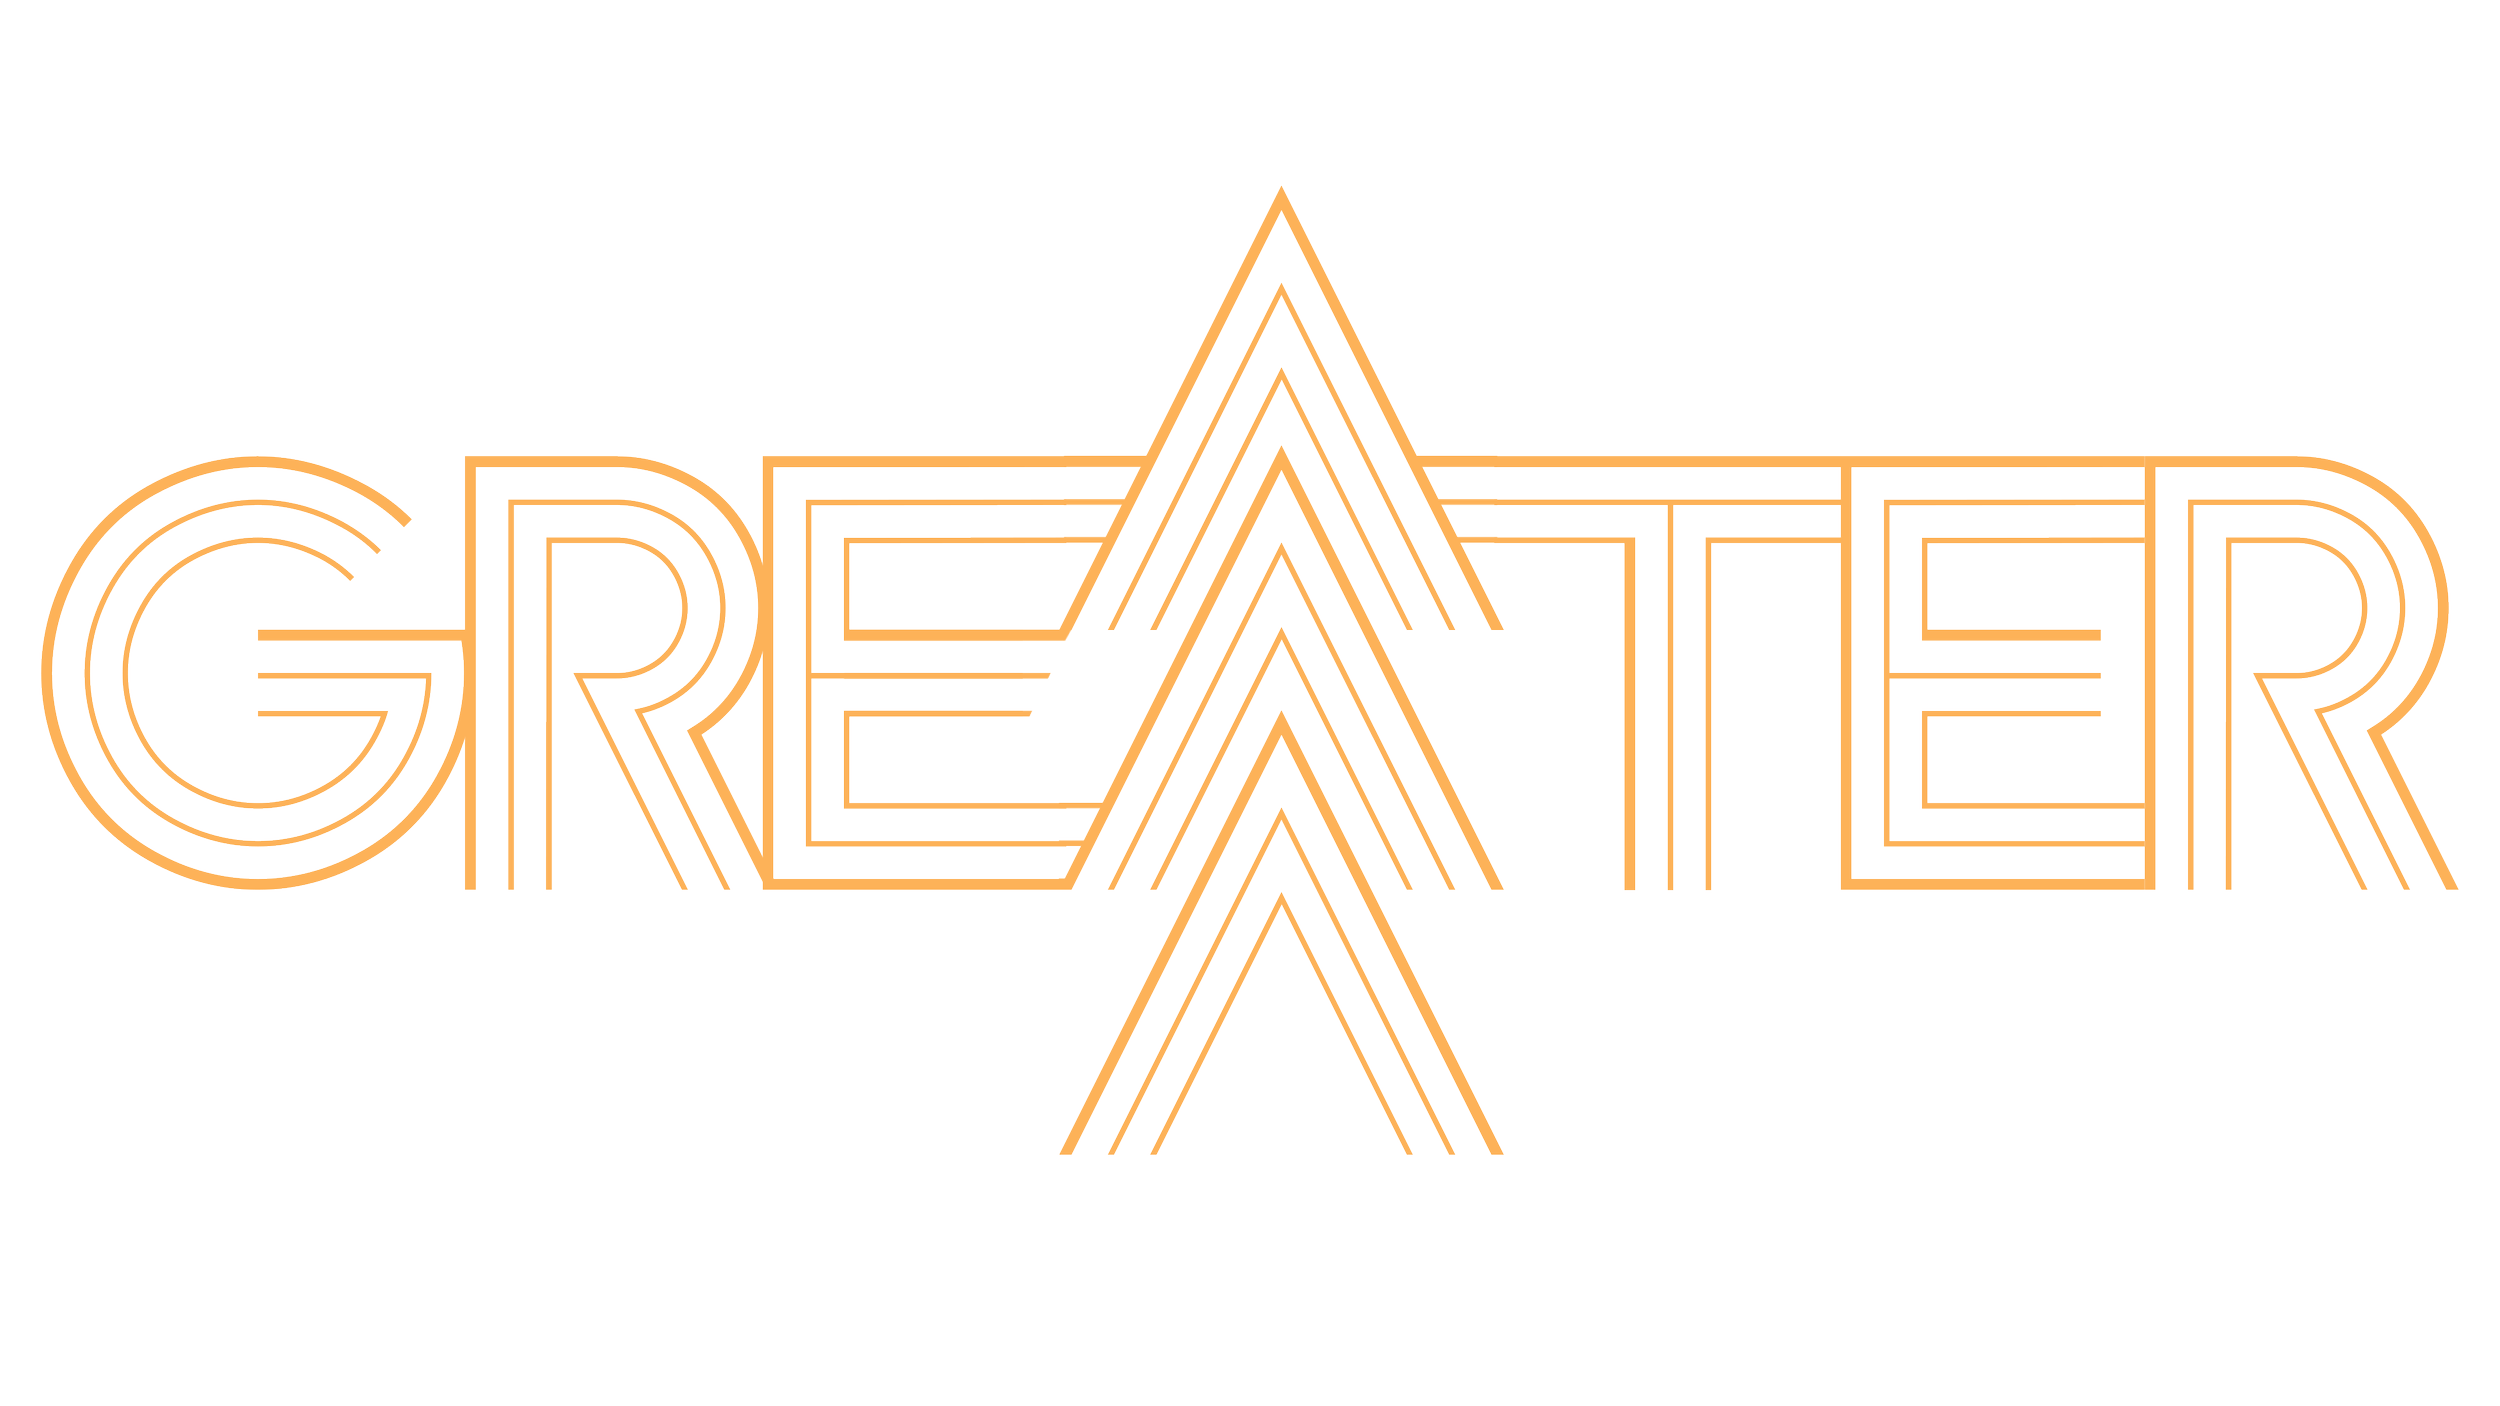 GREATER logo.png